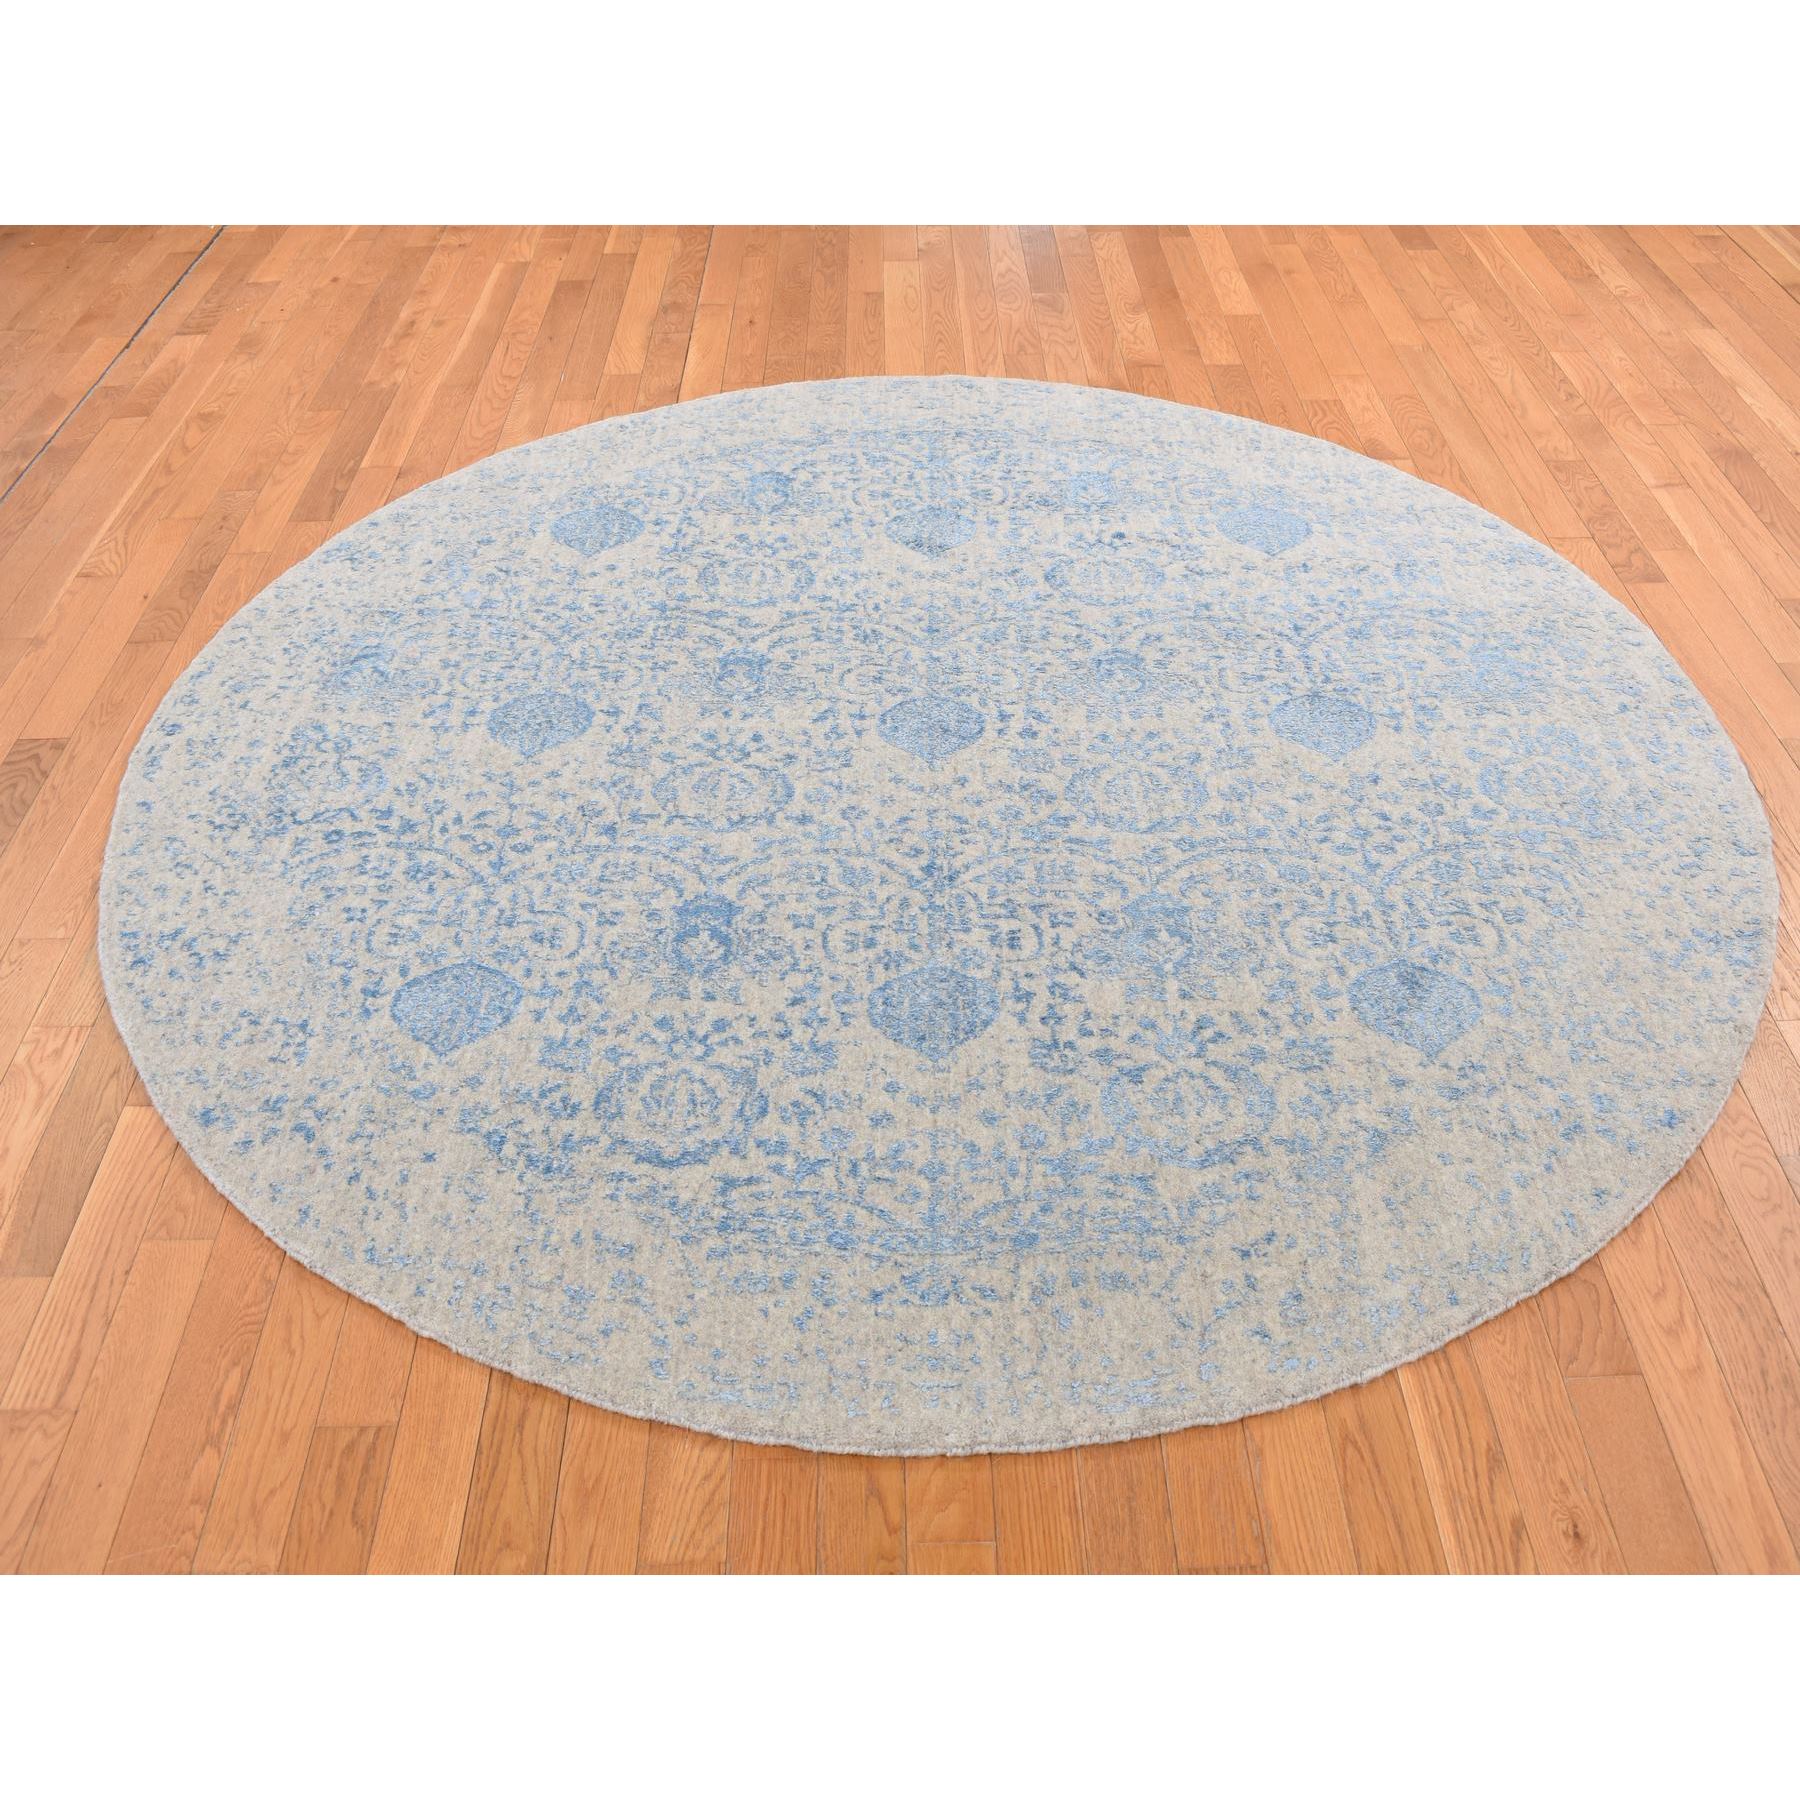 7'10"x7'10" Taupe Color, Jacquard Hand Loomed, Wool and Art Silk, Broken and Erased Pomegranate Design, Tone on Tone, Round Oriental Rug 